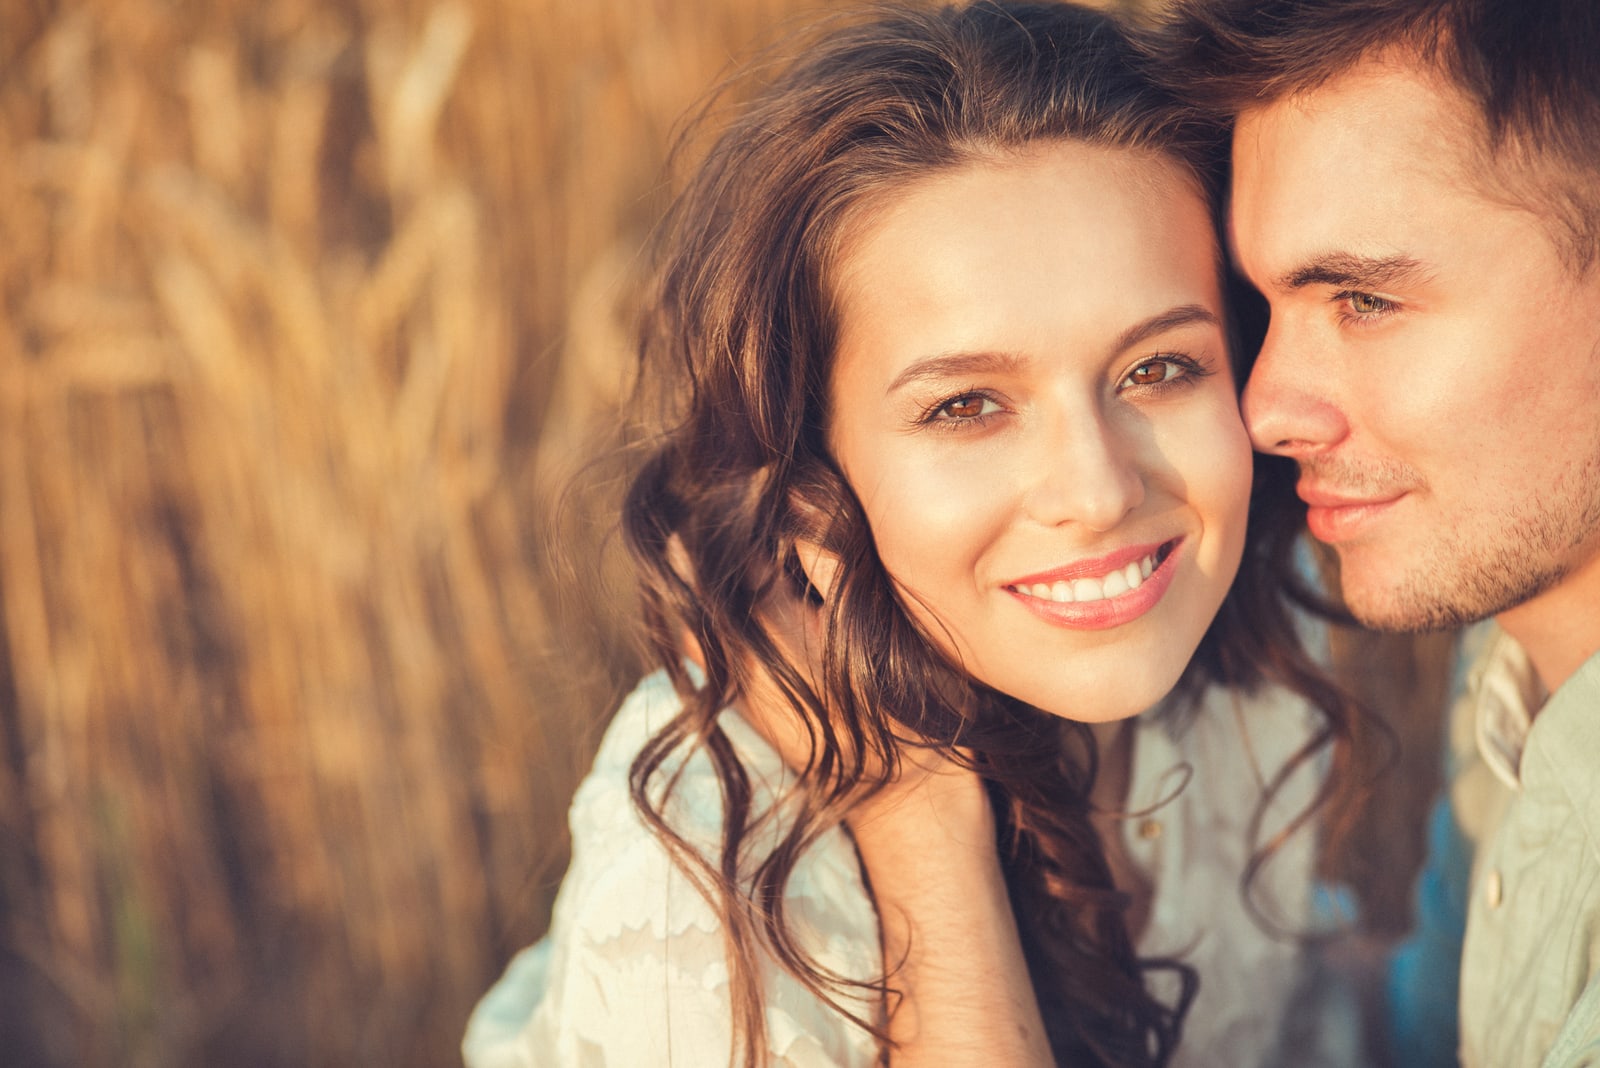 If She Has These 10 Qualities, She Is A Keeper And You Shouldn’t Let Her Go